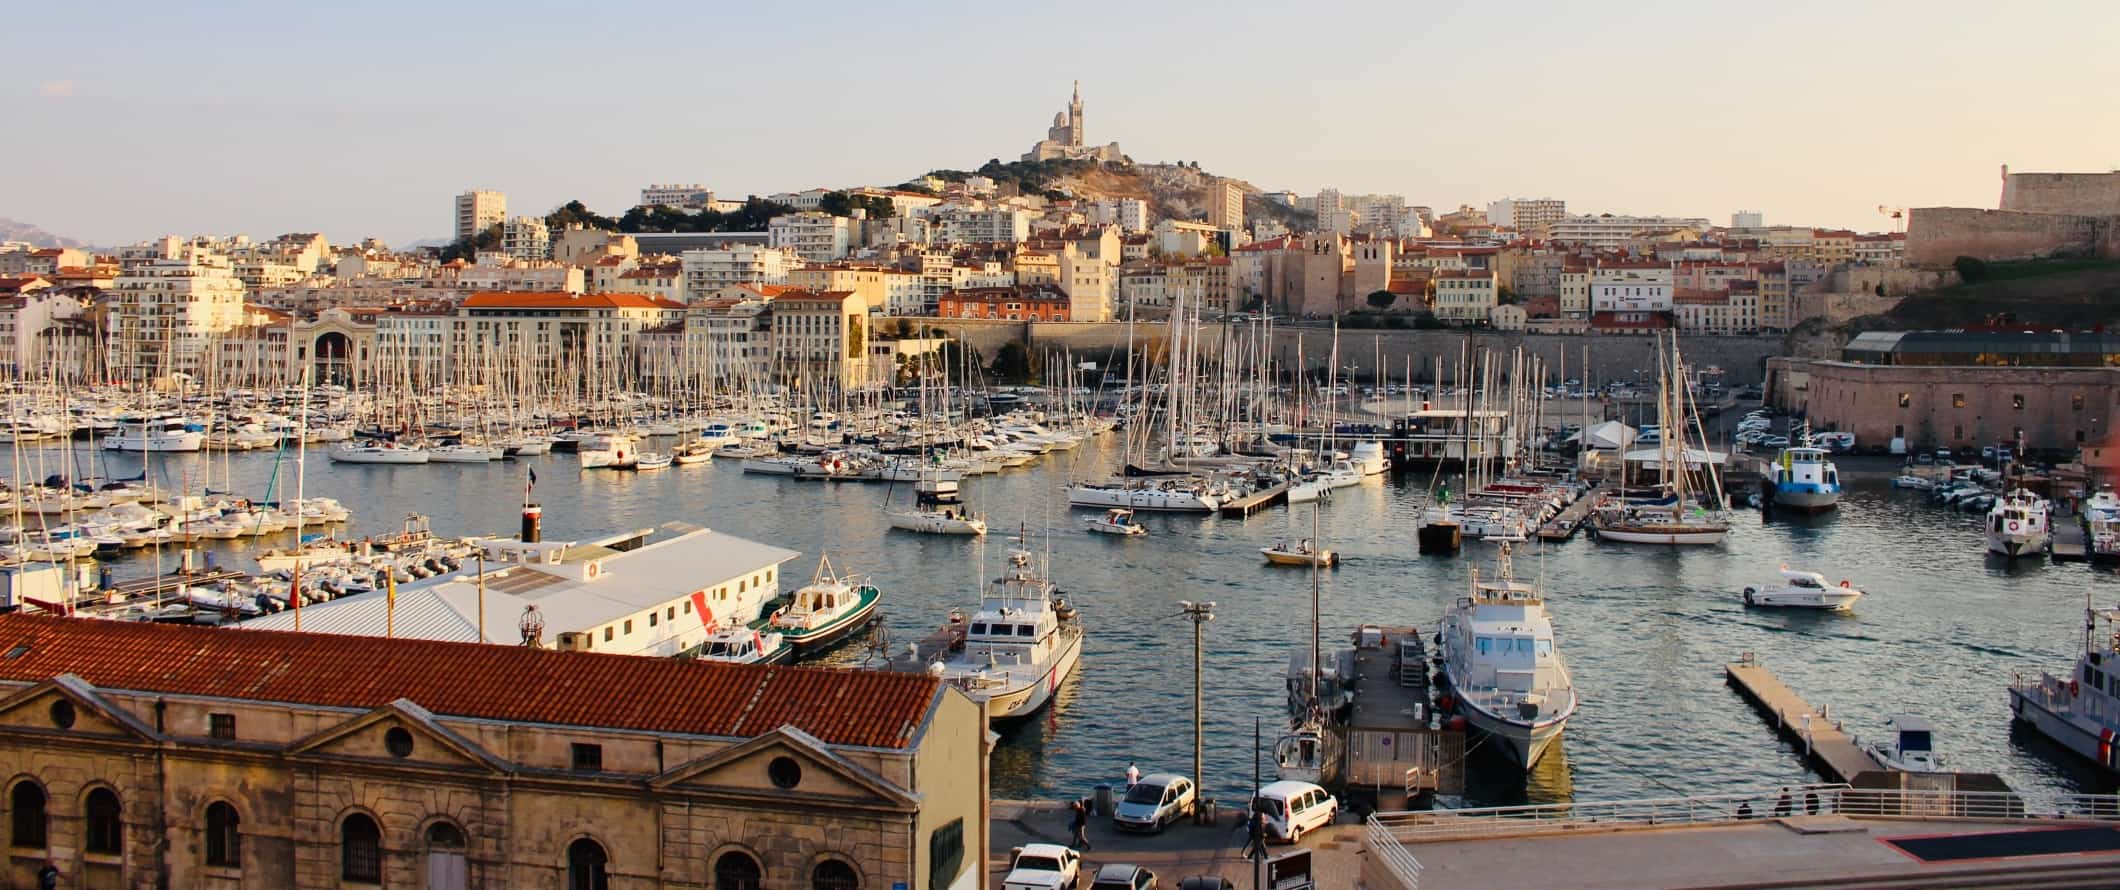 The old port filled with sailboats, with the city of Marseille rising up behind it in France